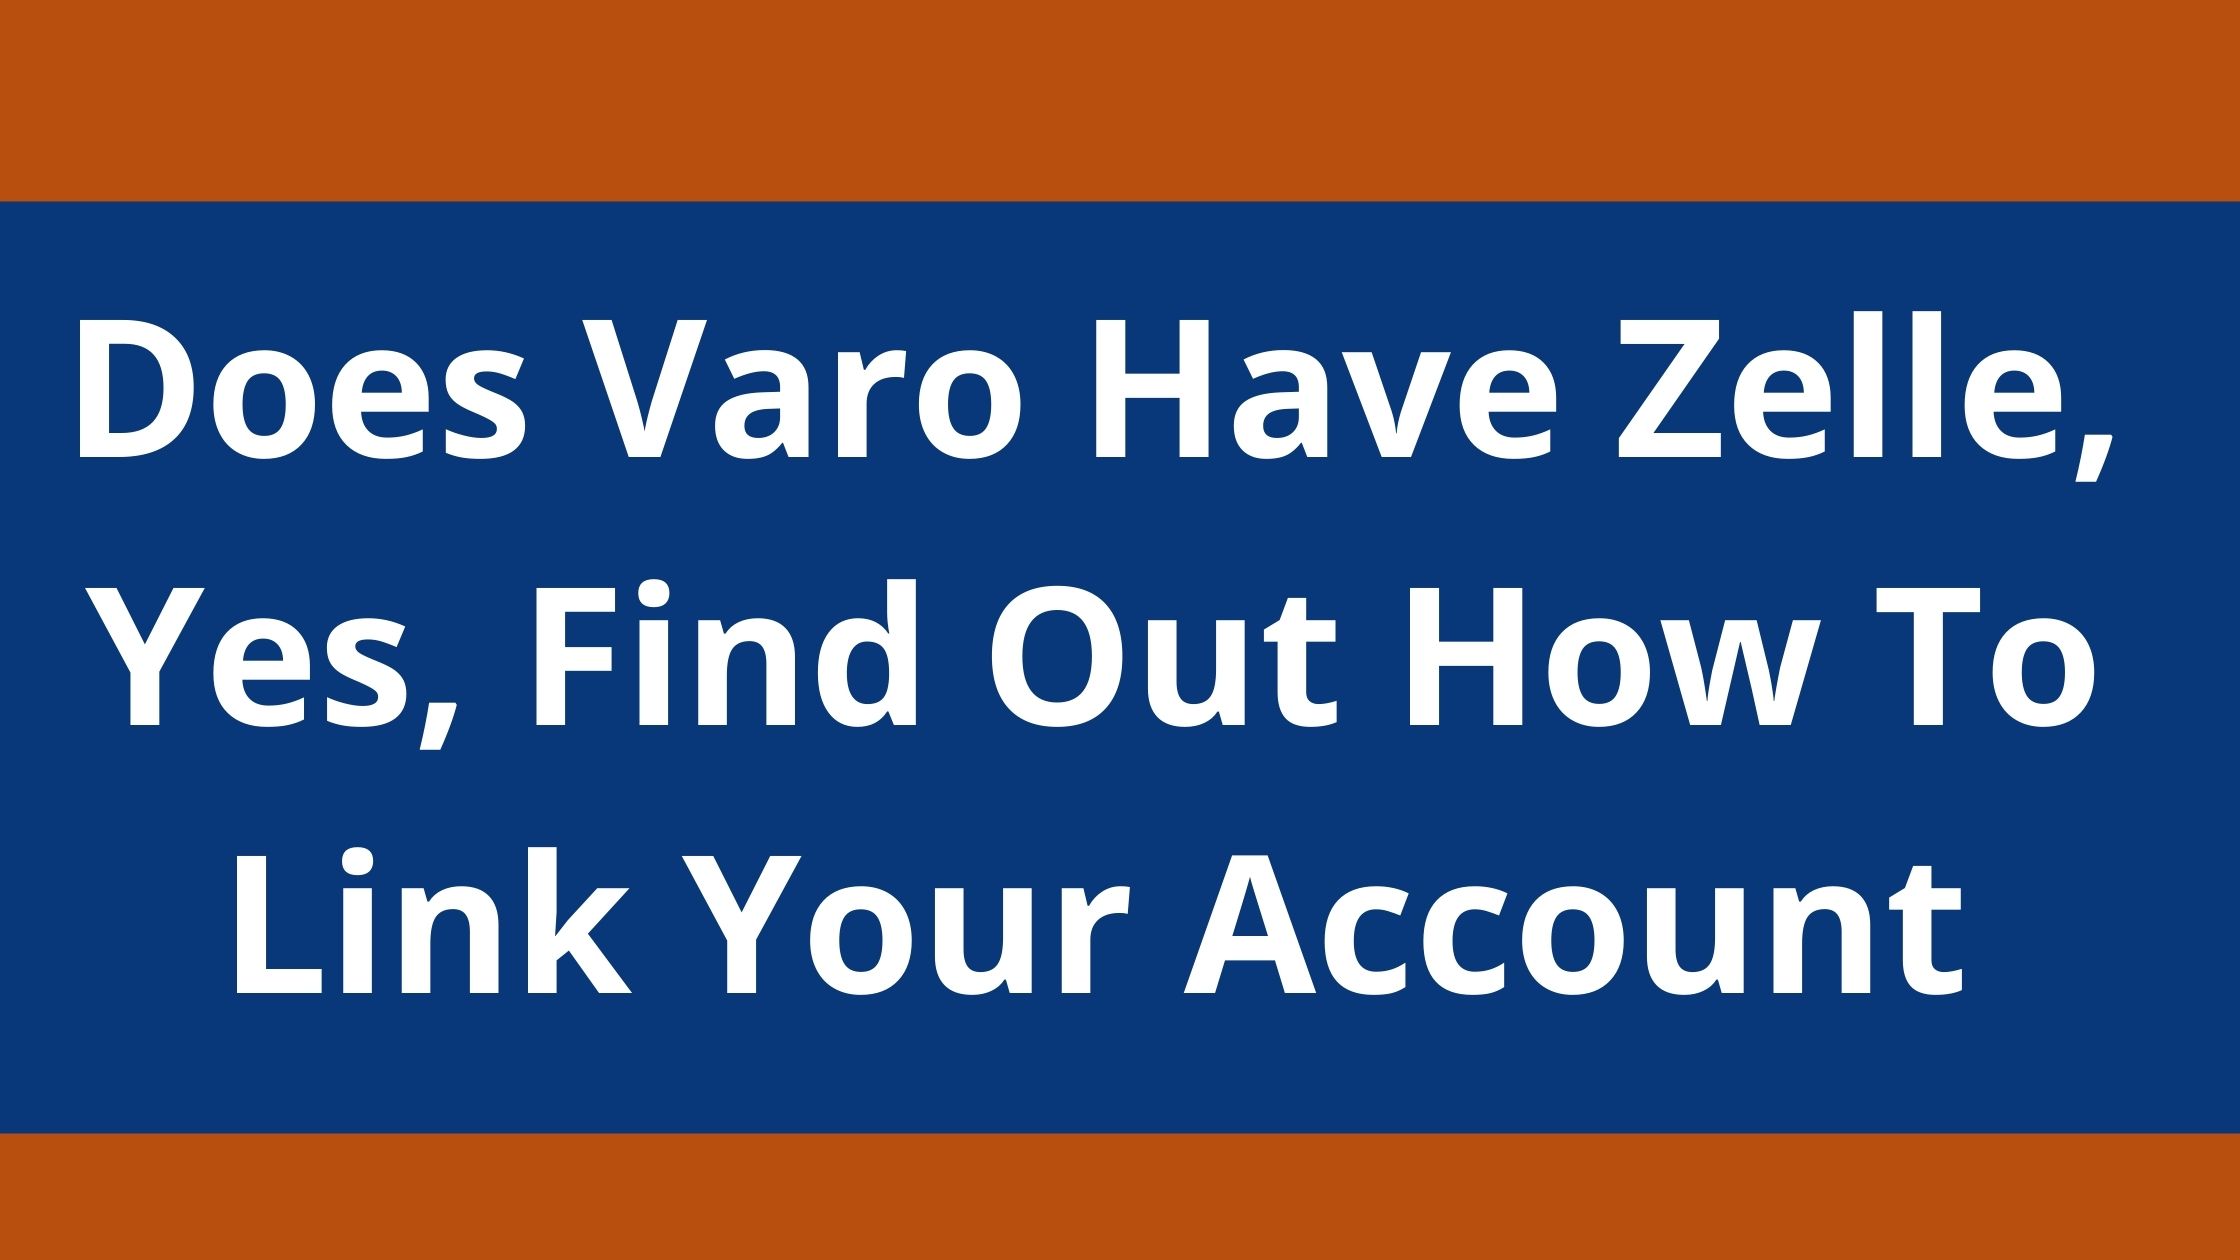 Does Varo Have Zelle, 2022, Yes, Find Out How To Link Your Account